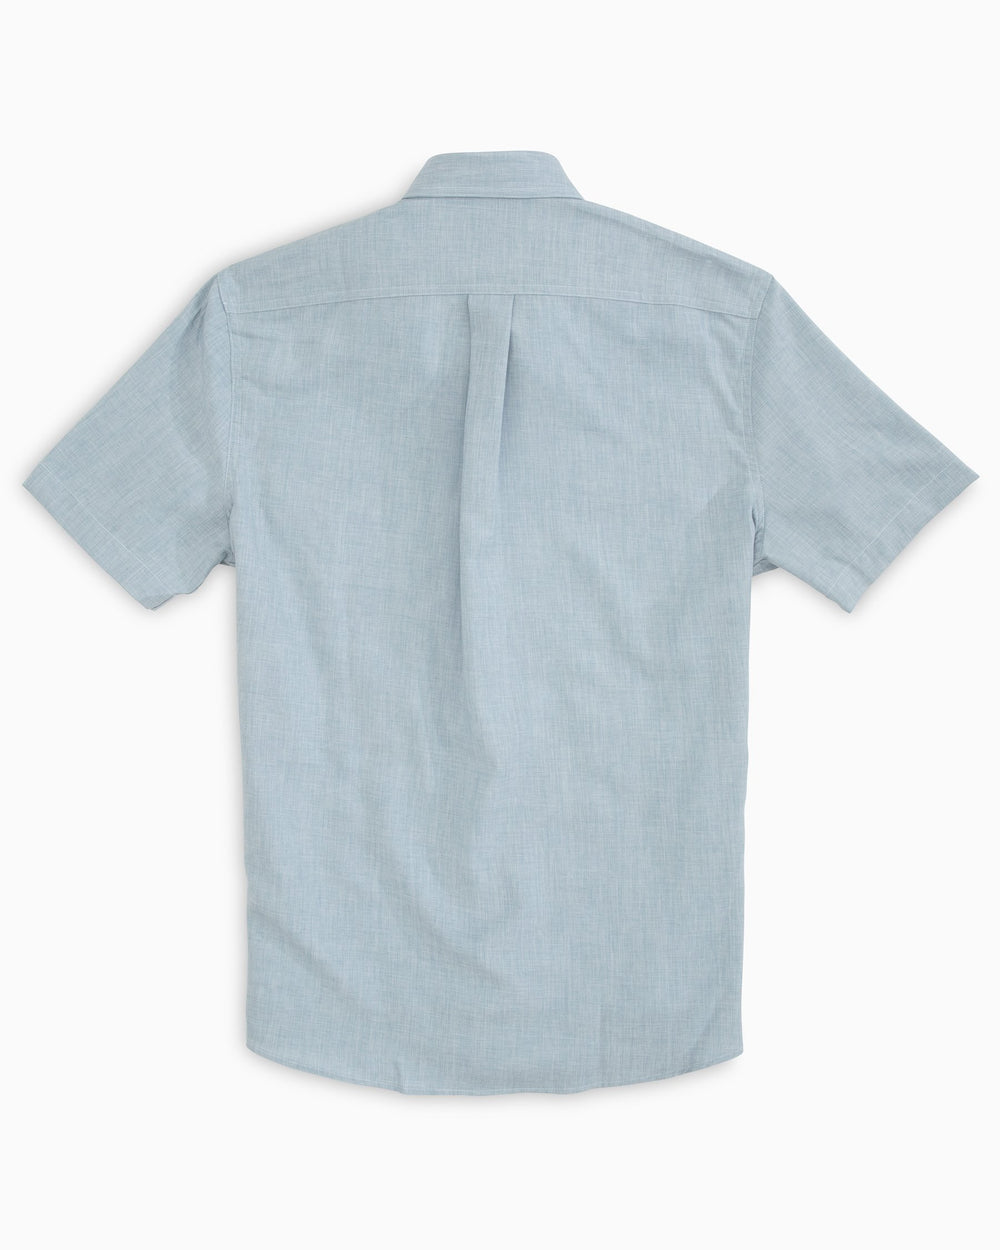 The back of the Florida Gators Short Sleeve Button Down Dock Shirt by Southern Tide - Seagull Grey